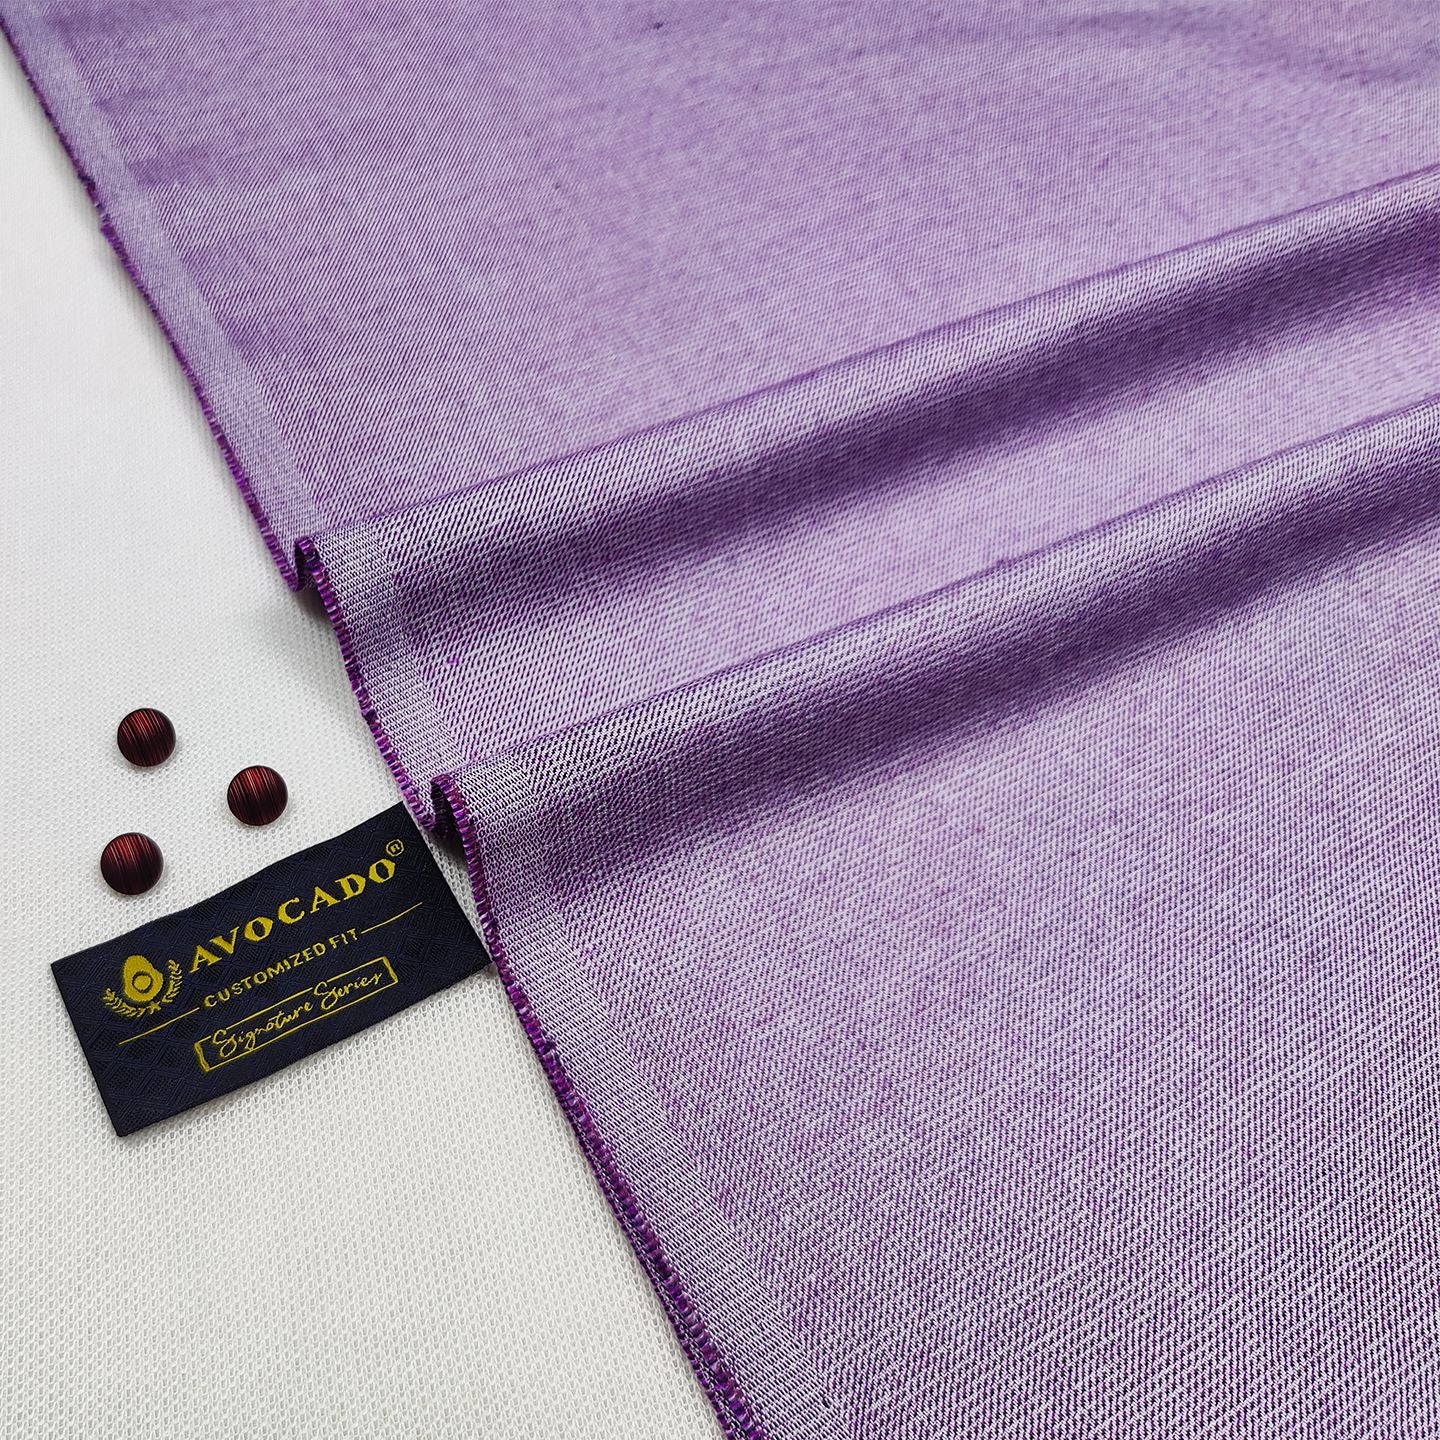 Purple Polo kameez shalwar Fabric with Buttons & label